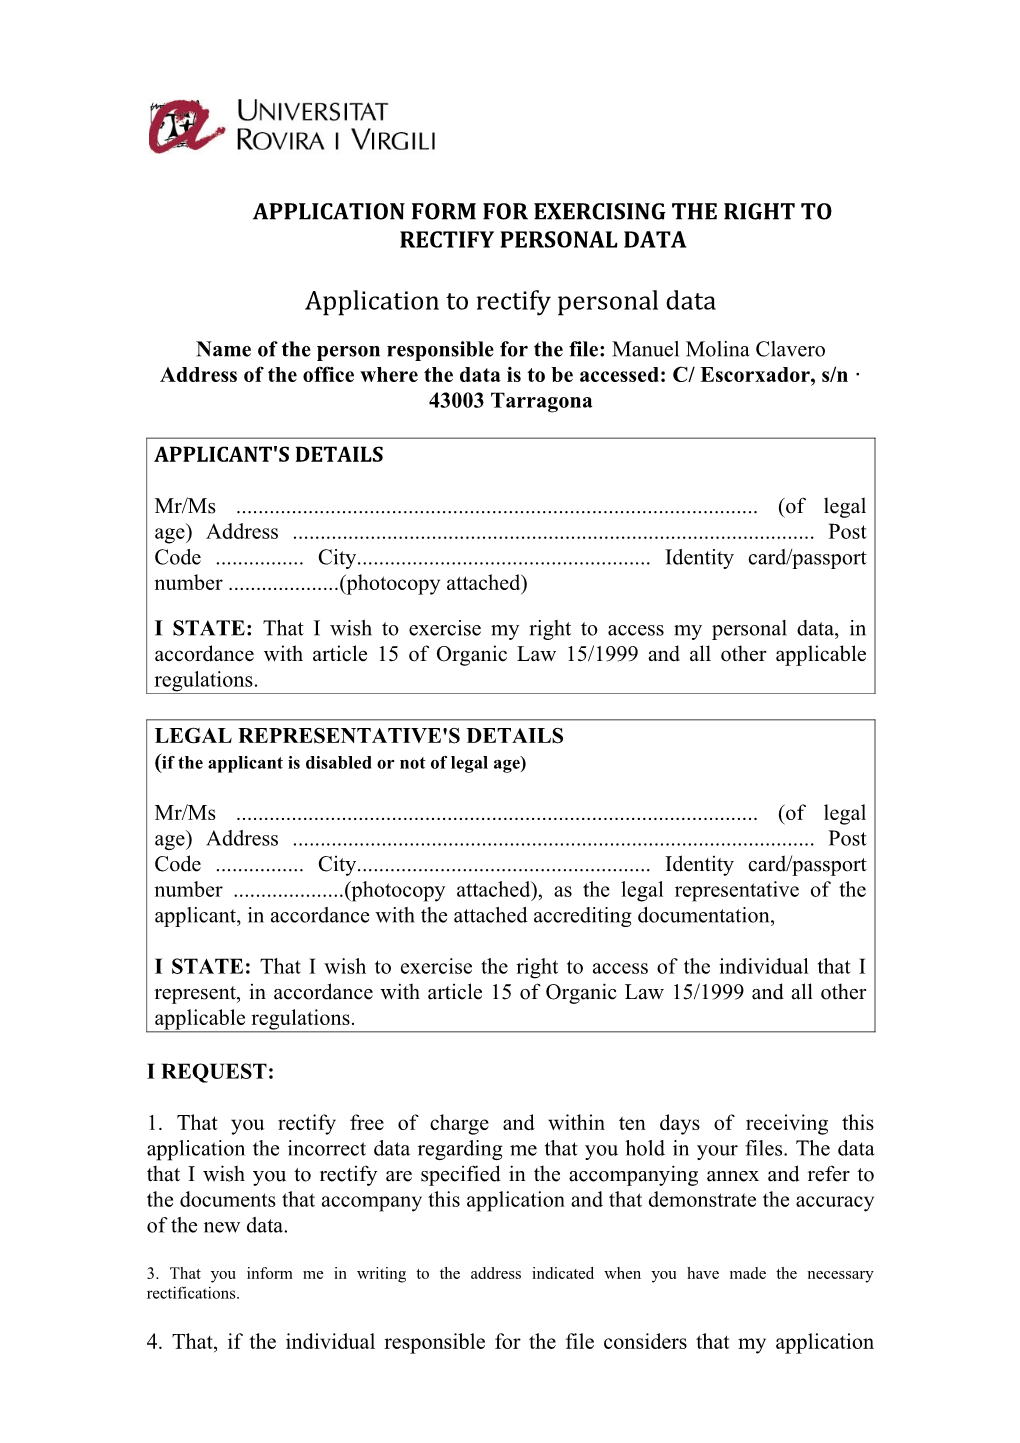 Application Form for Exercising the Right to Rectify Personal Data